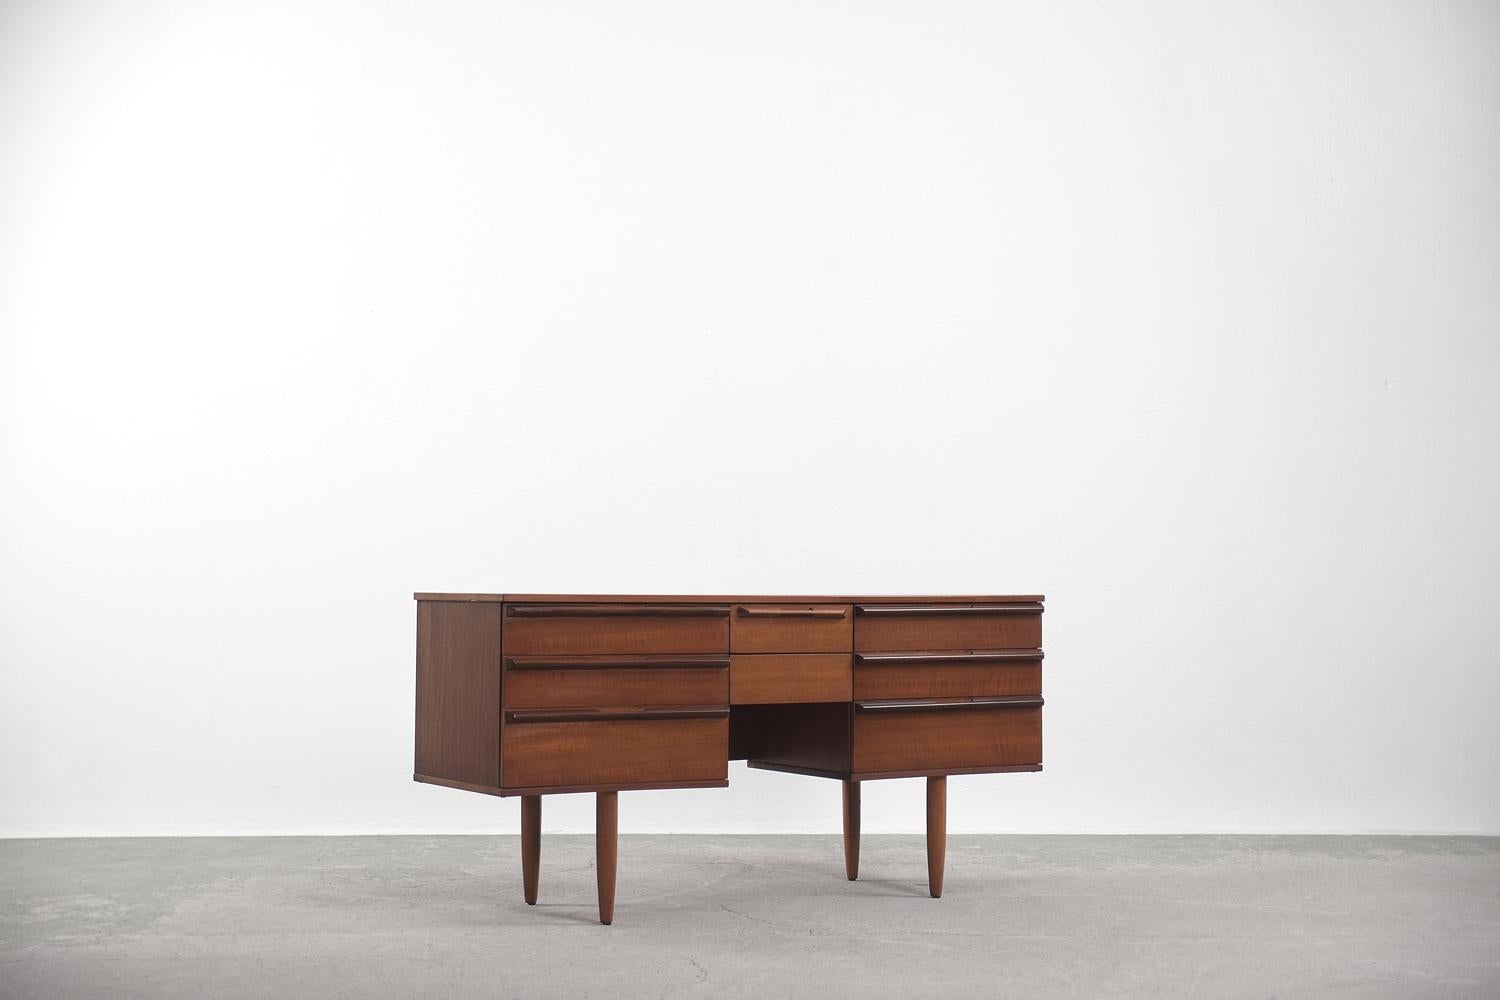 This classic desk or dressing table was probably manufacturer by English maker Avalon, which produced Danish design furniture. This piece was created during the 1960s. The desk has an elegant look. It has six larger drawers and two smaller ones in